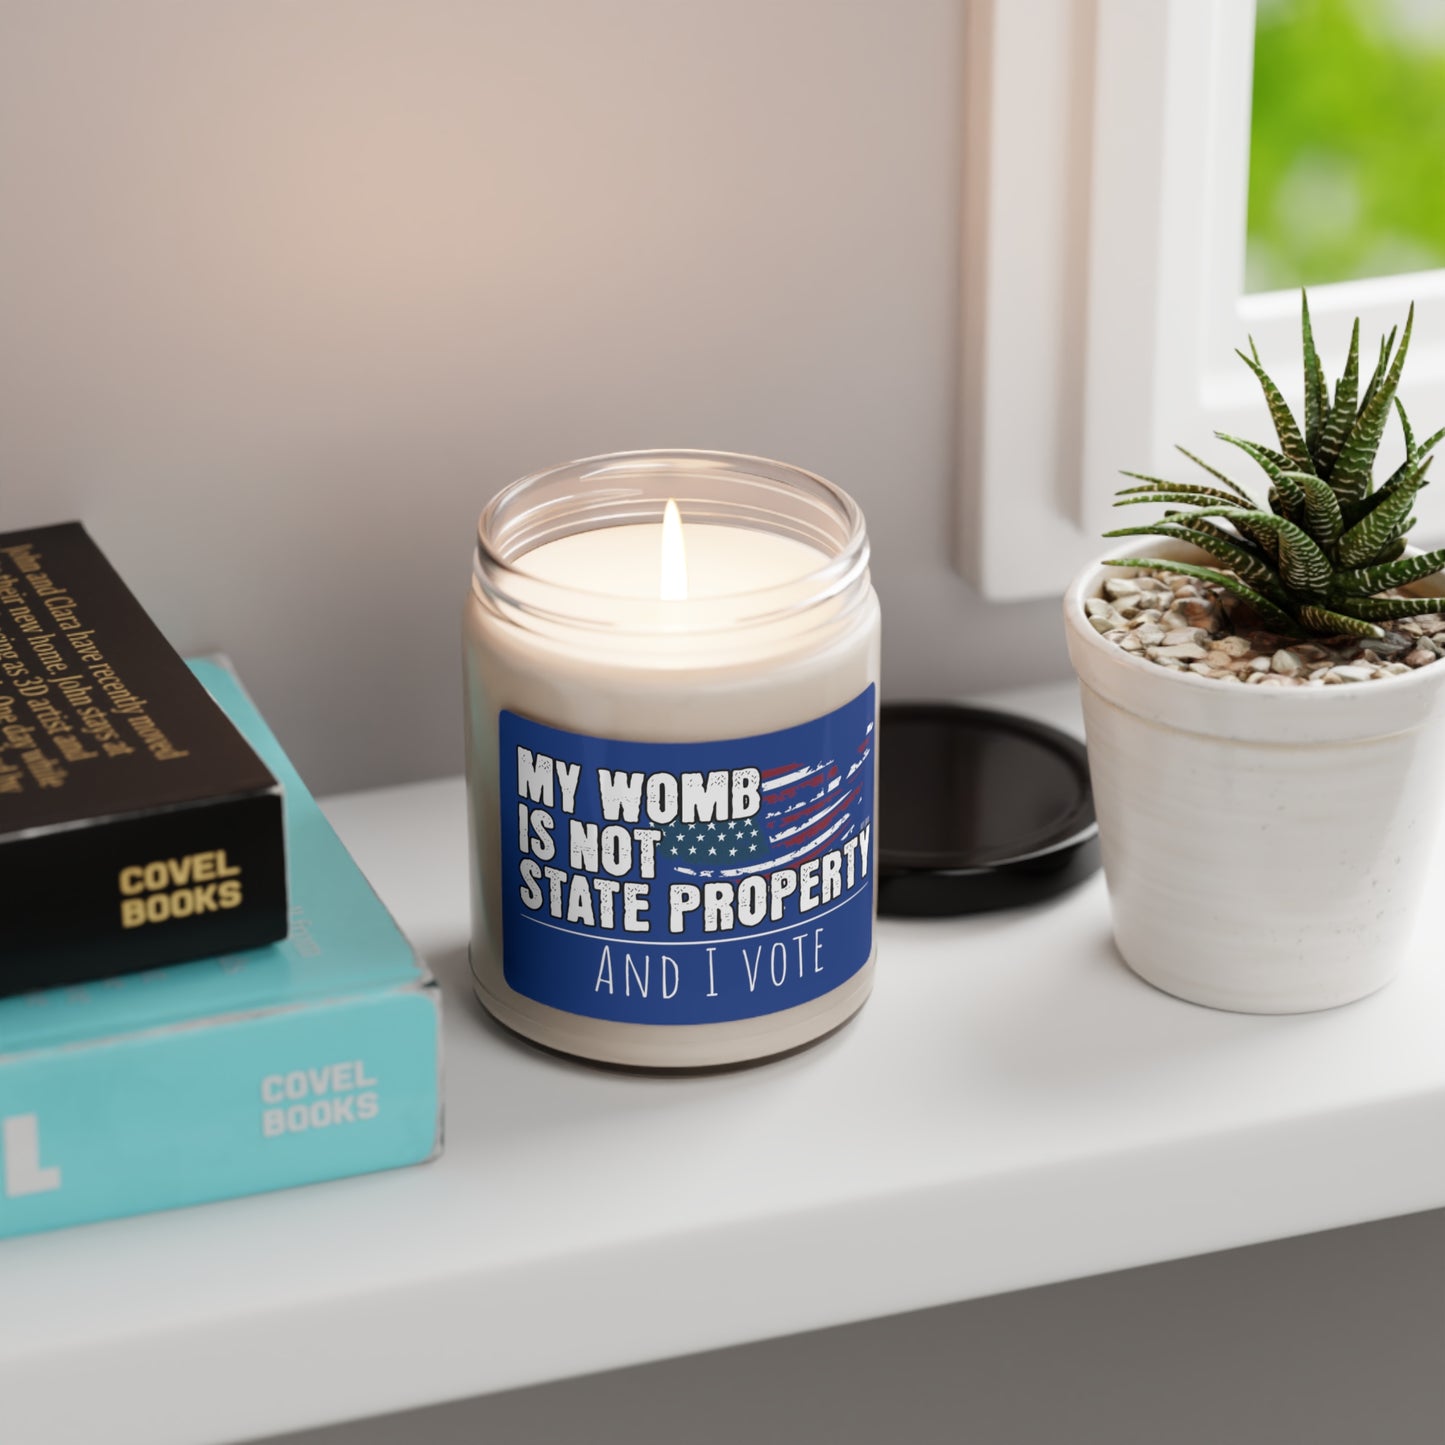 Trendy 9 oz scented candle with a pro-choice message